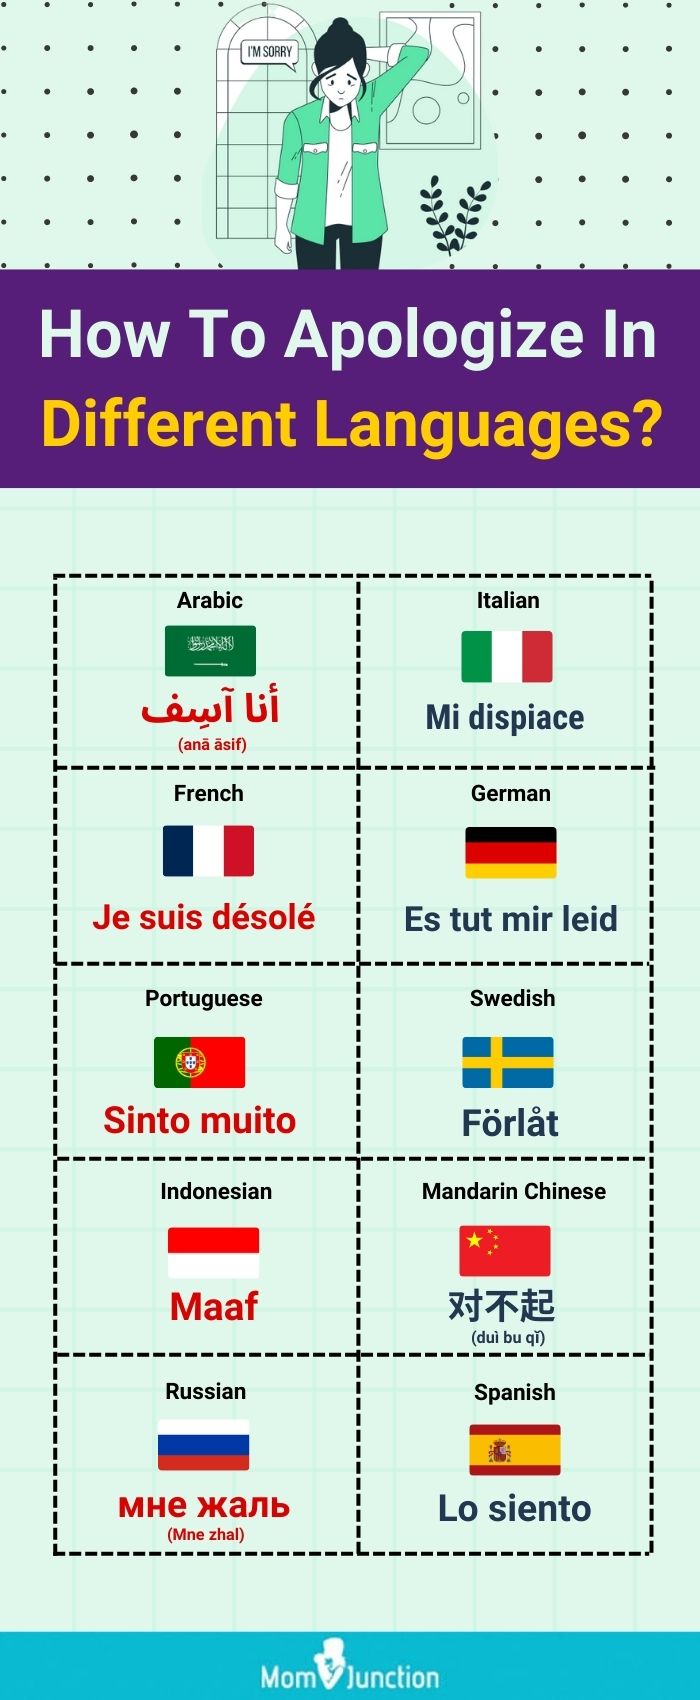 how to apologize in different languages [infographic]